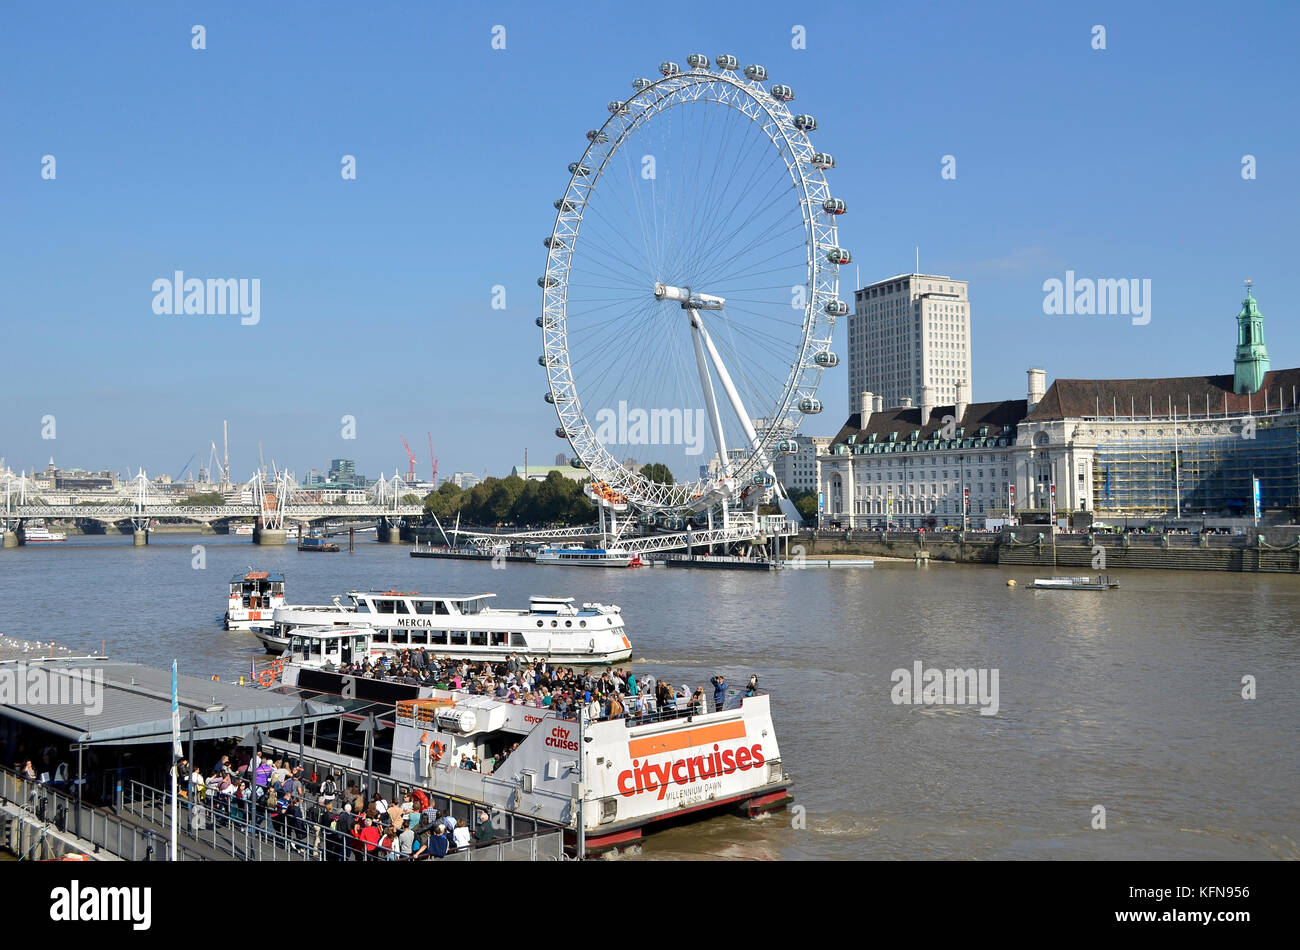 London Eye, River Thames, London, UK. Westminster Pier in foreground. Stock Photo